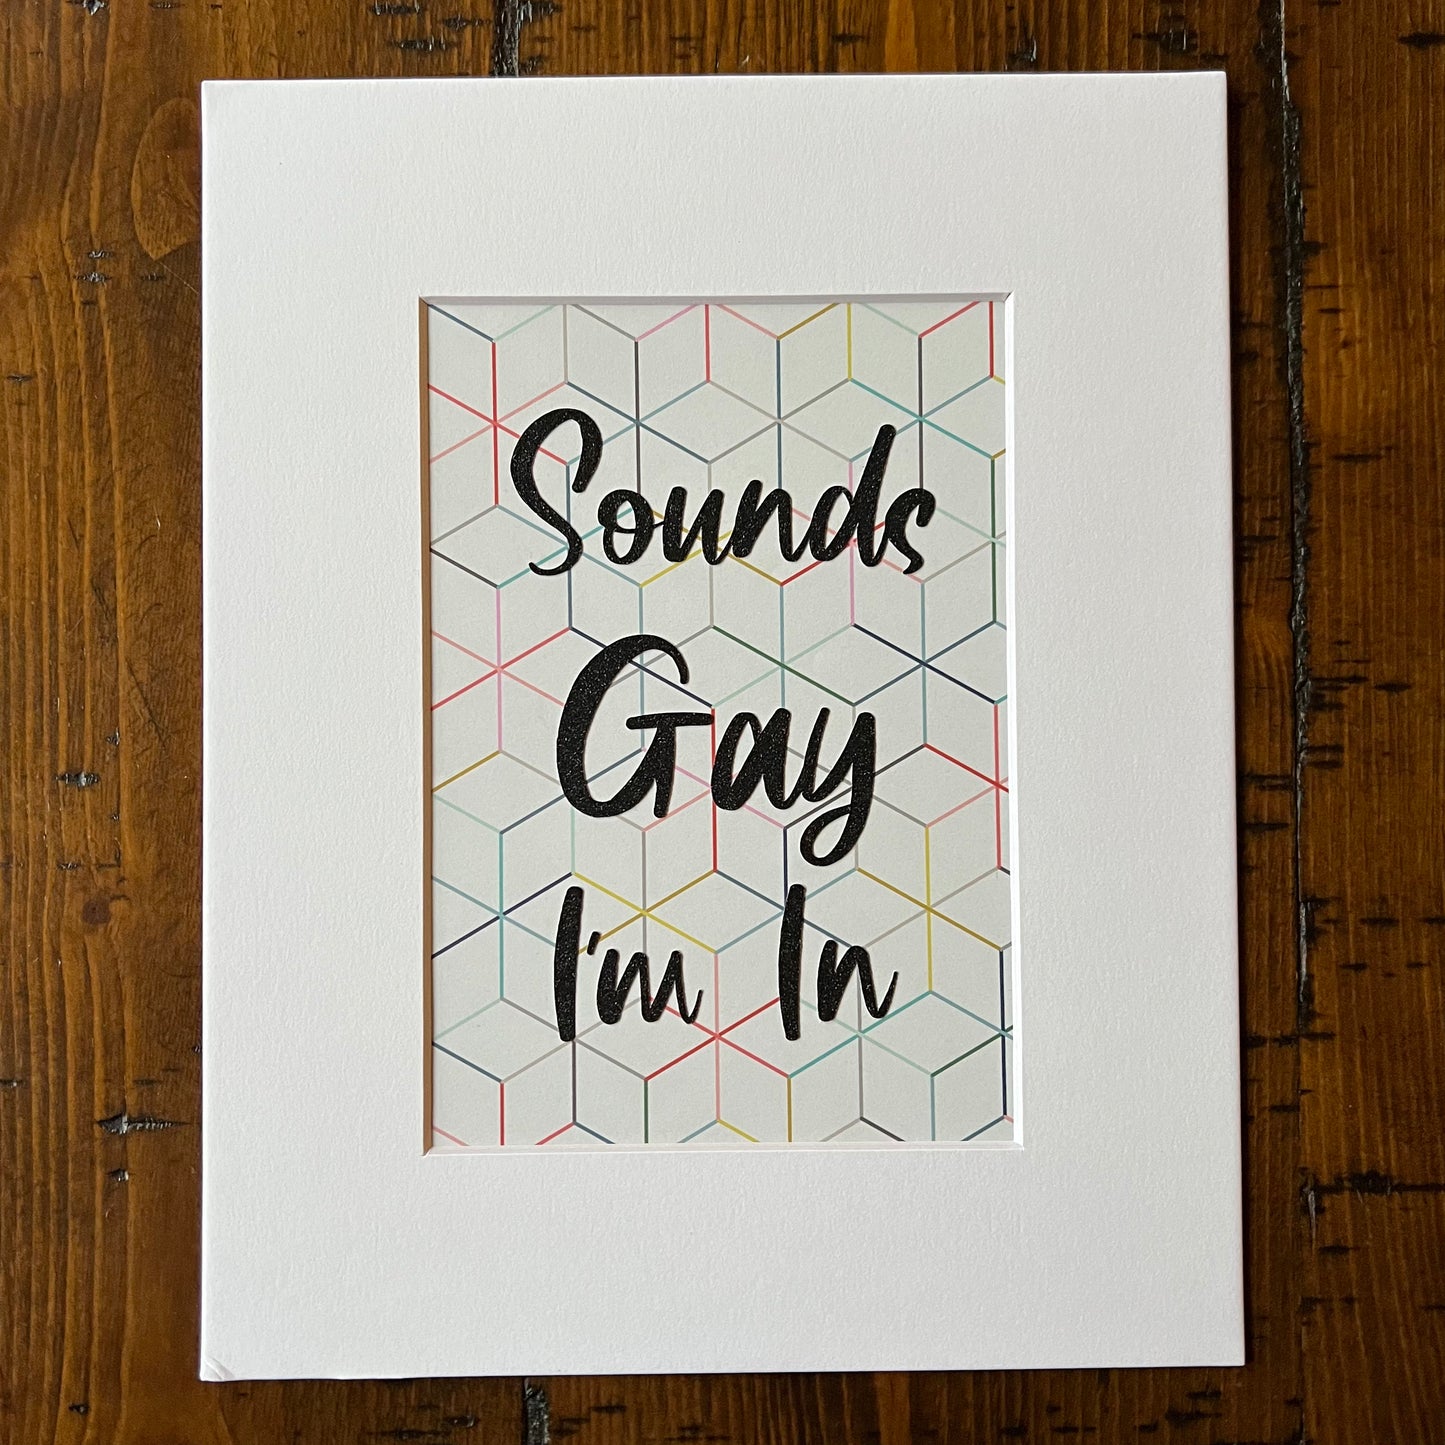 Sounds Gay I'm In with Geometric Rainbow Background Multimedia Papercraft